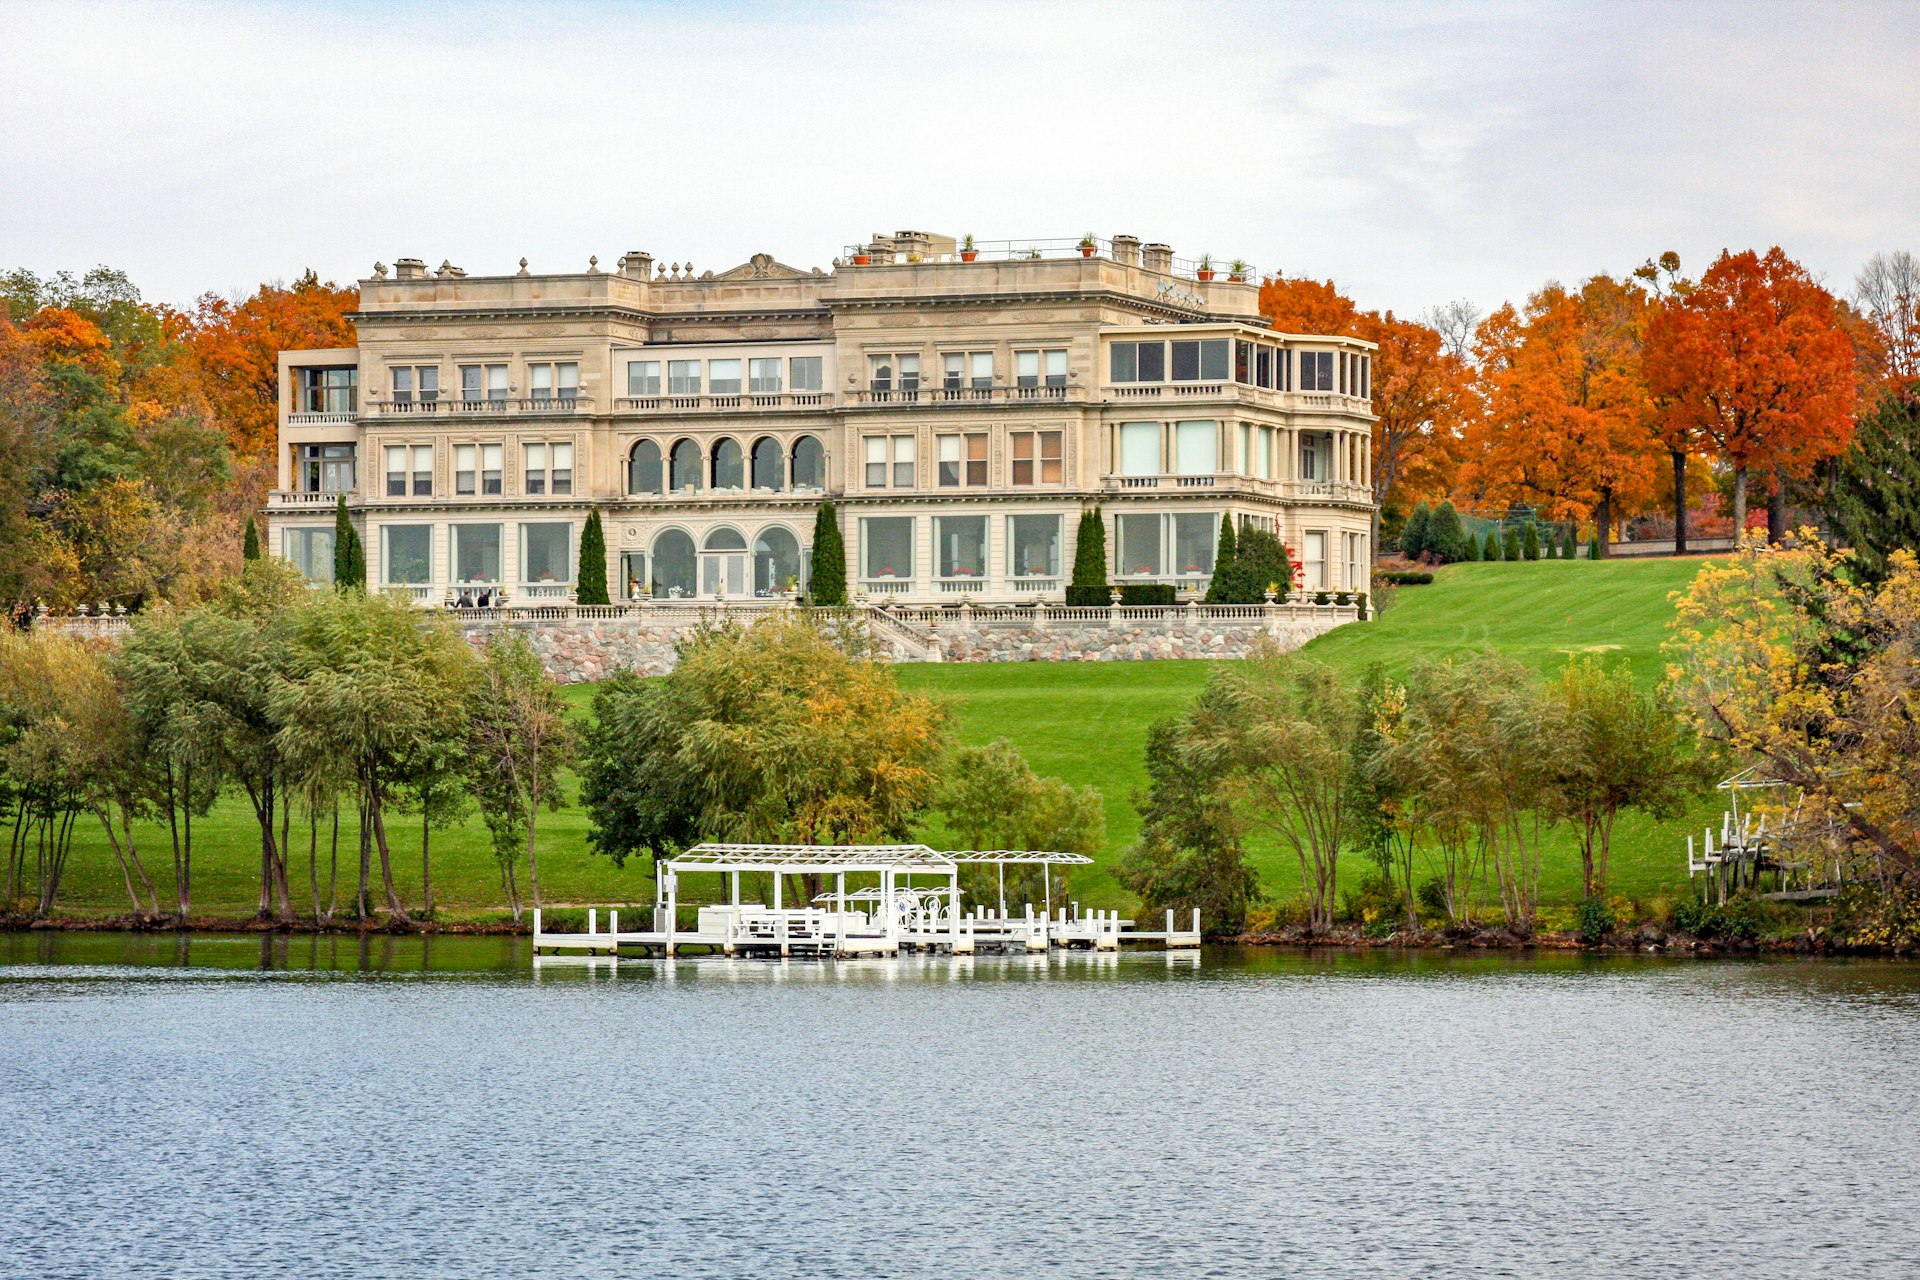 A large mansion sits on a green hill backed by orange and red trees, with a small dock and Lake Geneva in the foreground